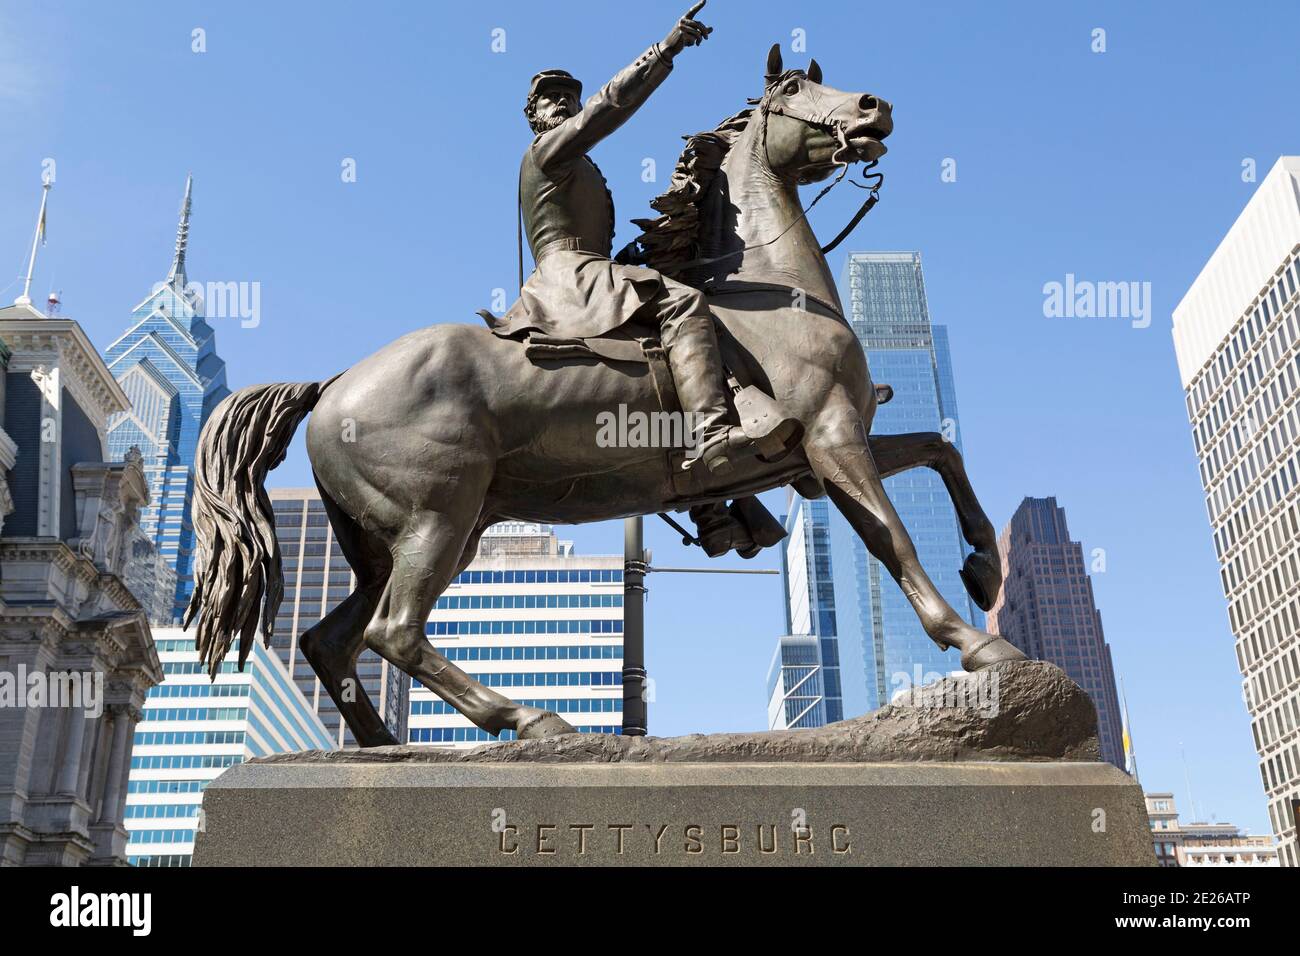 Statue of General John Fulton Reynolds (1820 - 1863) in Philadelphia, USA. Reynolds led the Union's Army of the Potomac to the Battle of Gettysburg. Stock Photo